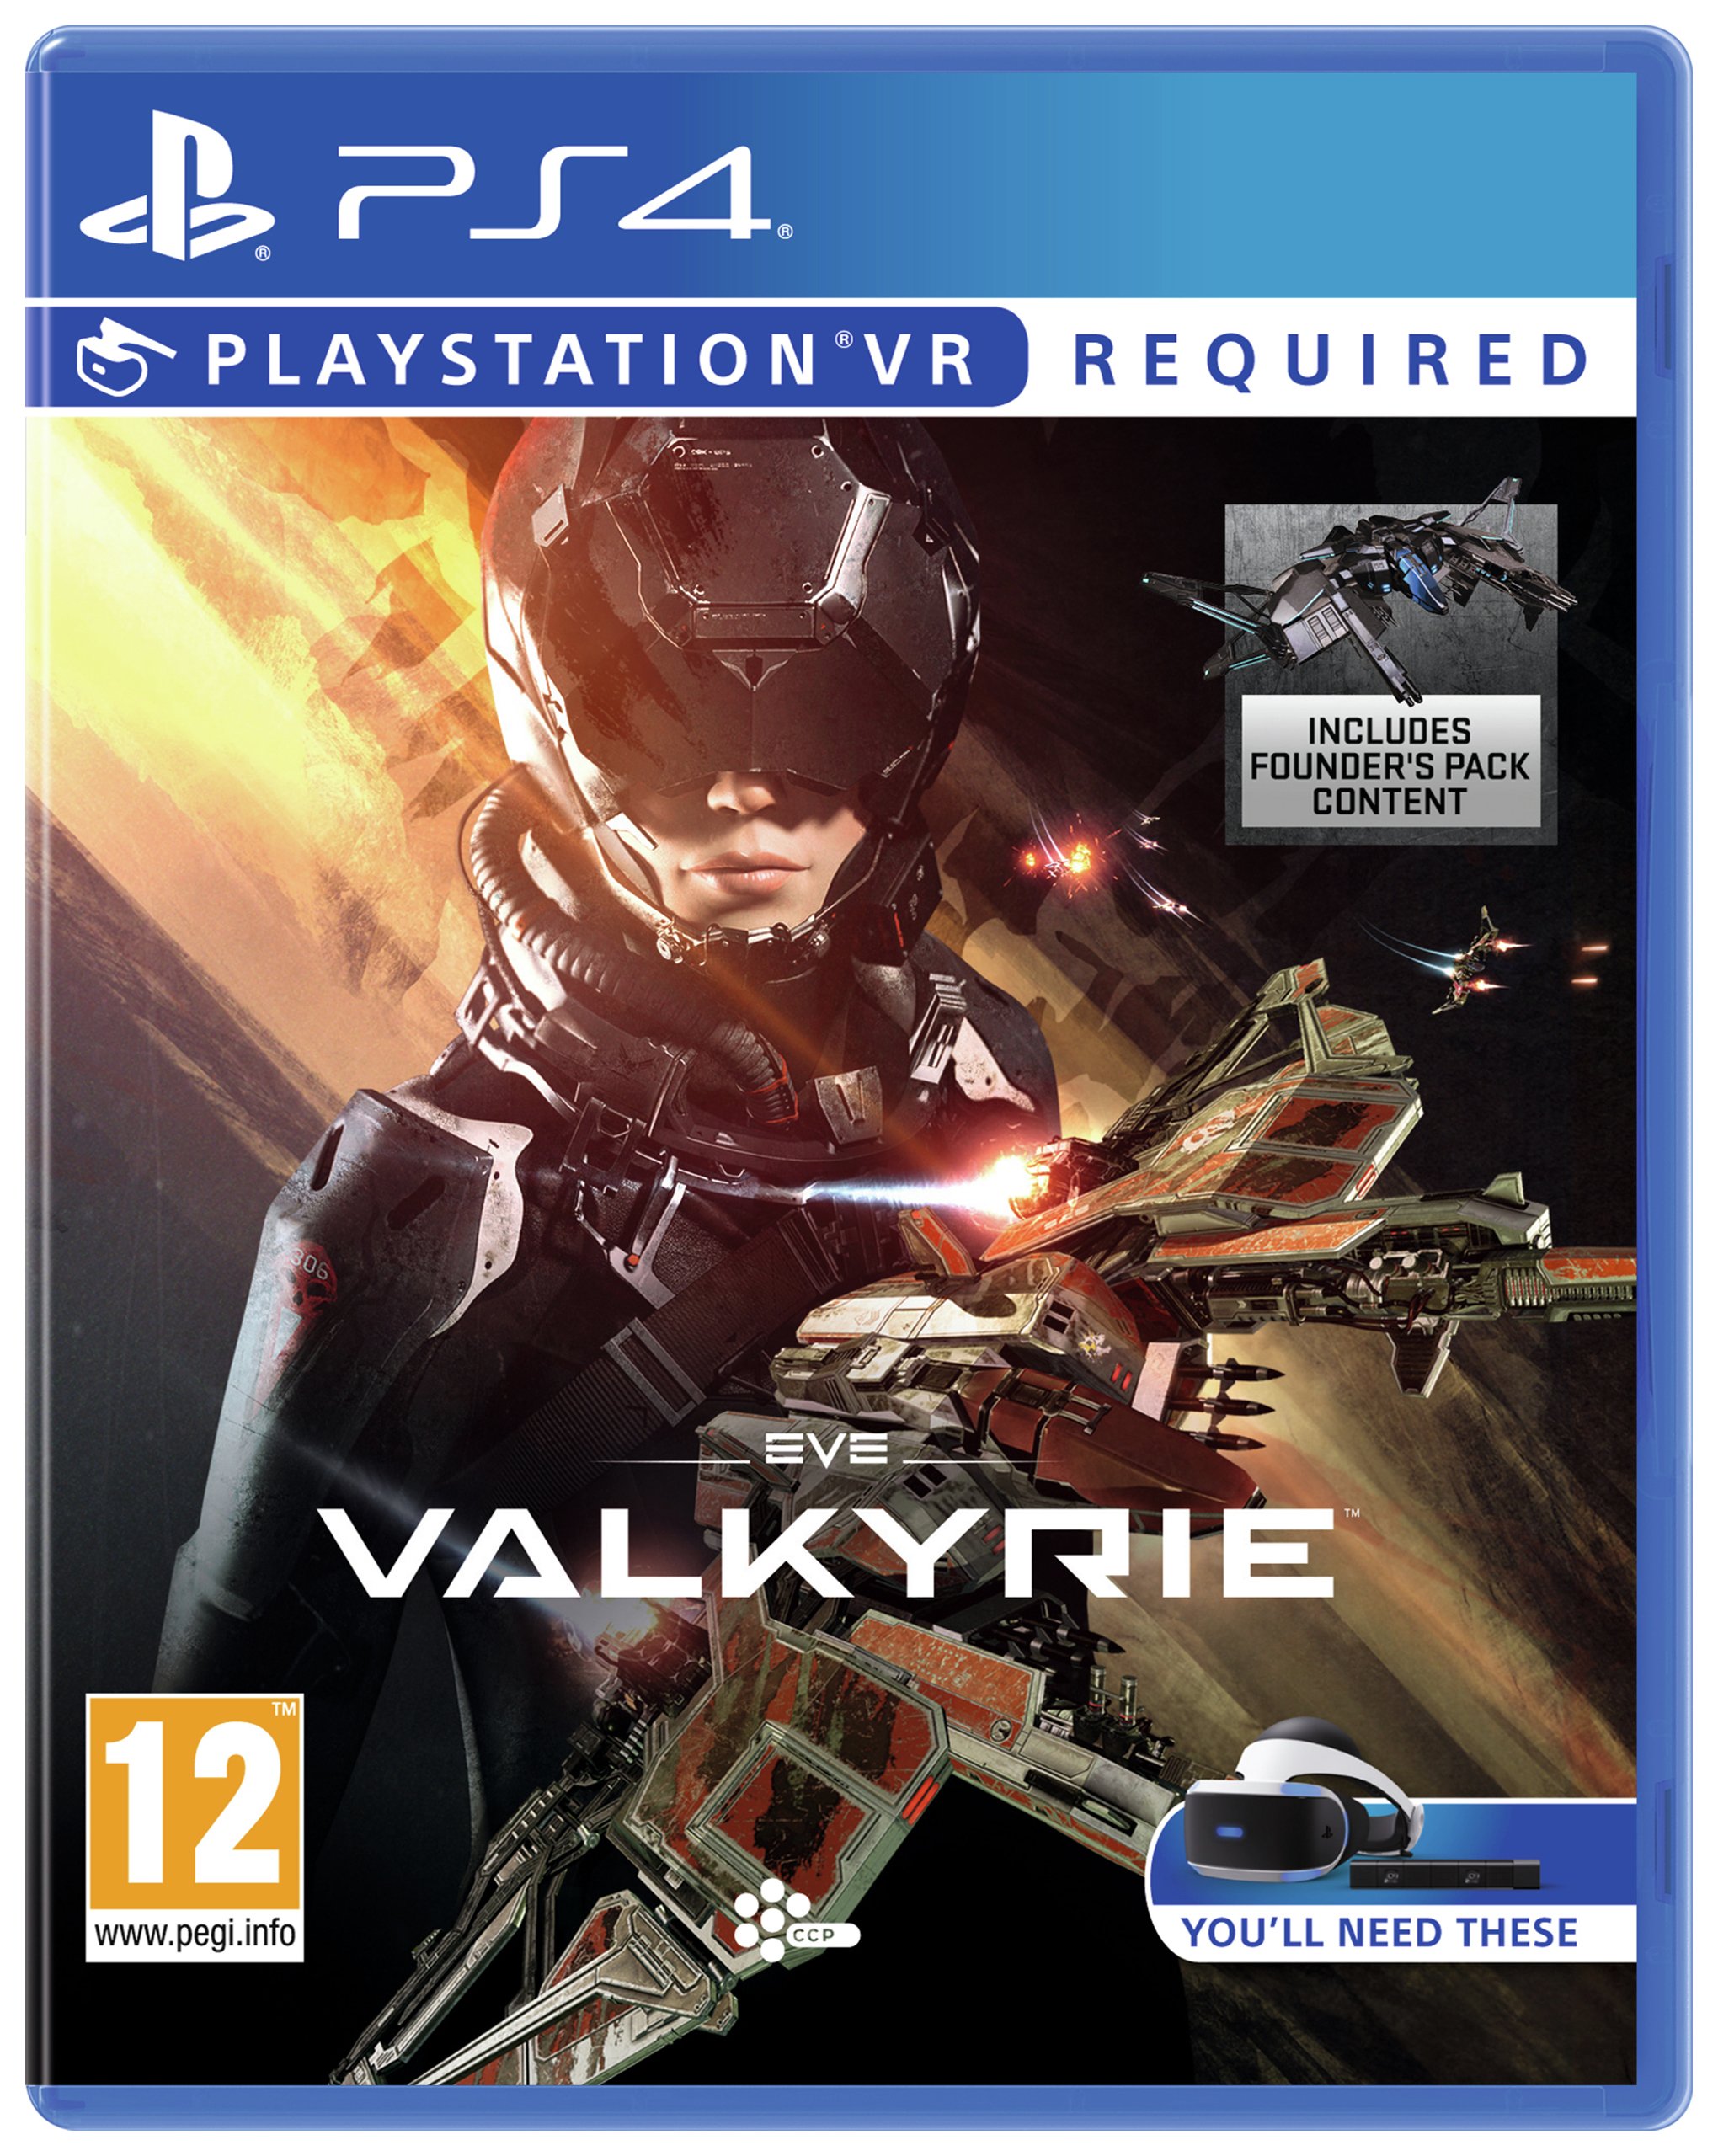 Eve Valkyrie PS4 VR Game.